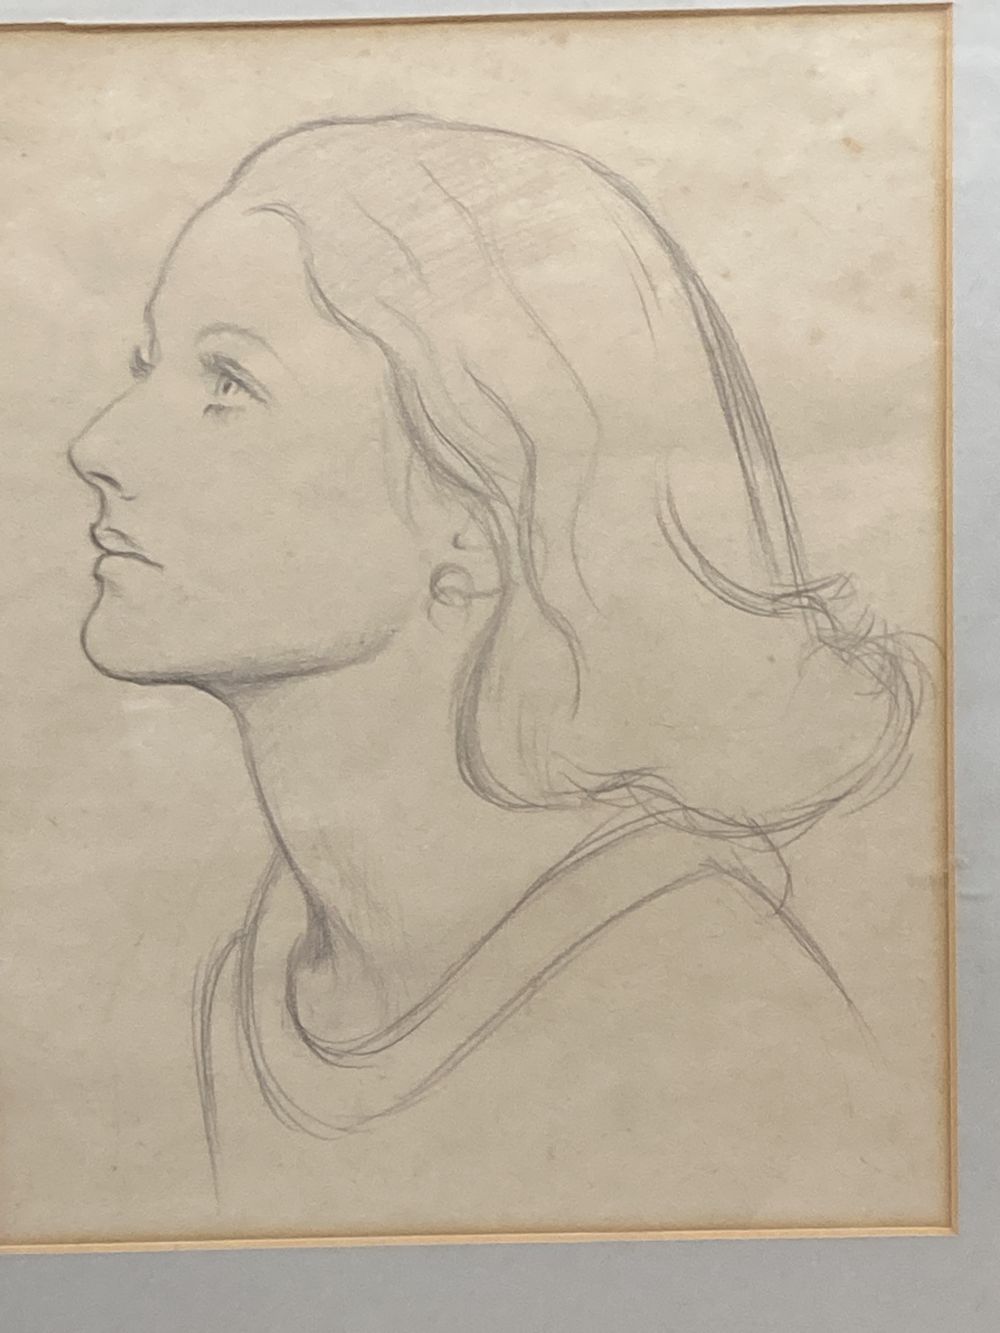 William Rothenstein (1872-1945), four pencil drawings, Studies of a young lady, inscribed and dated 1933, 26 x 20cm